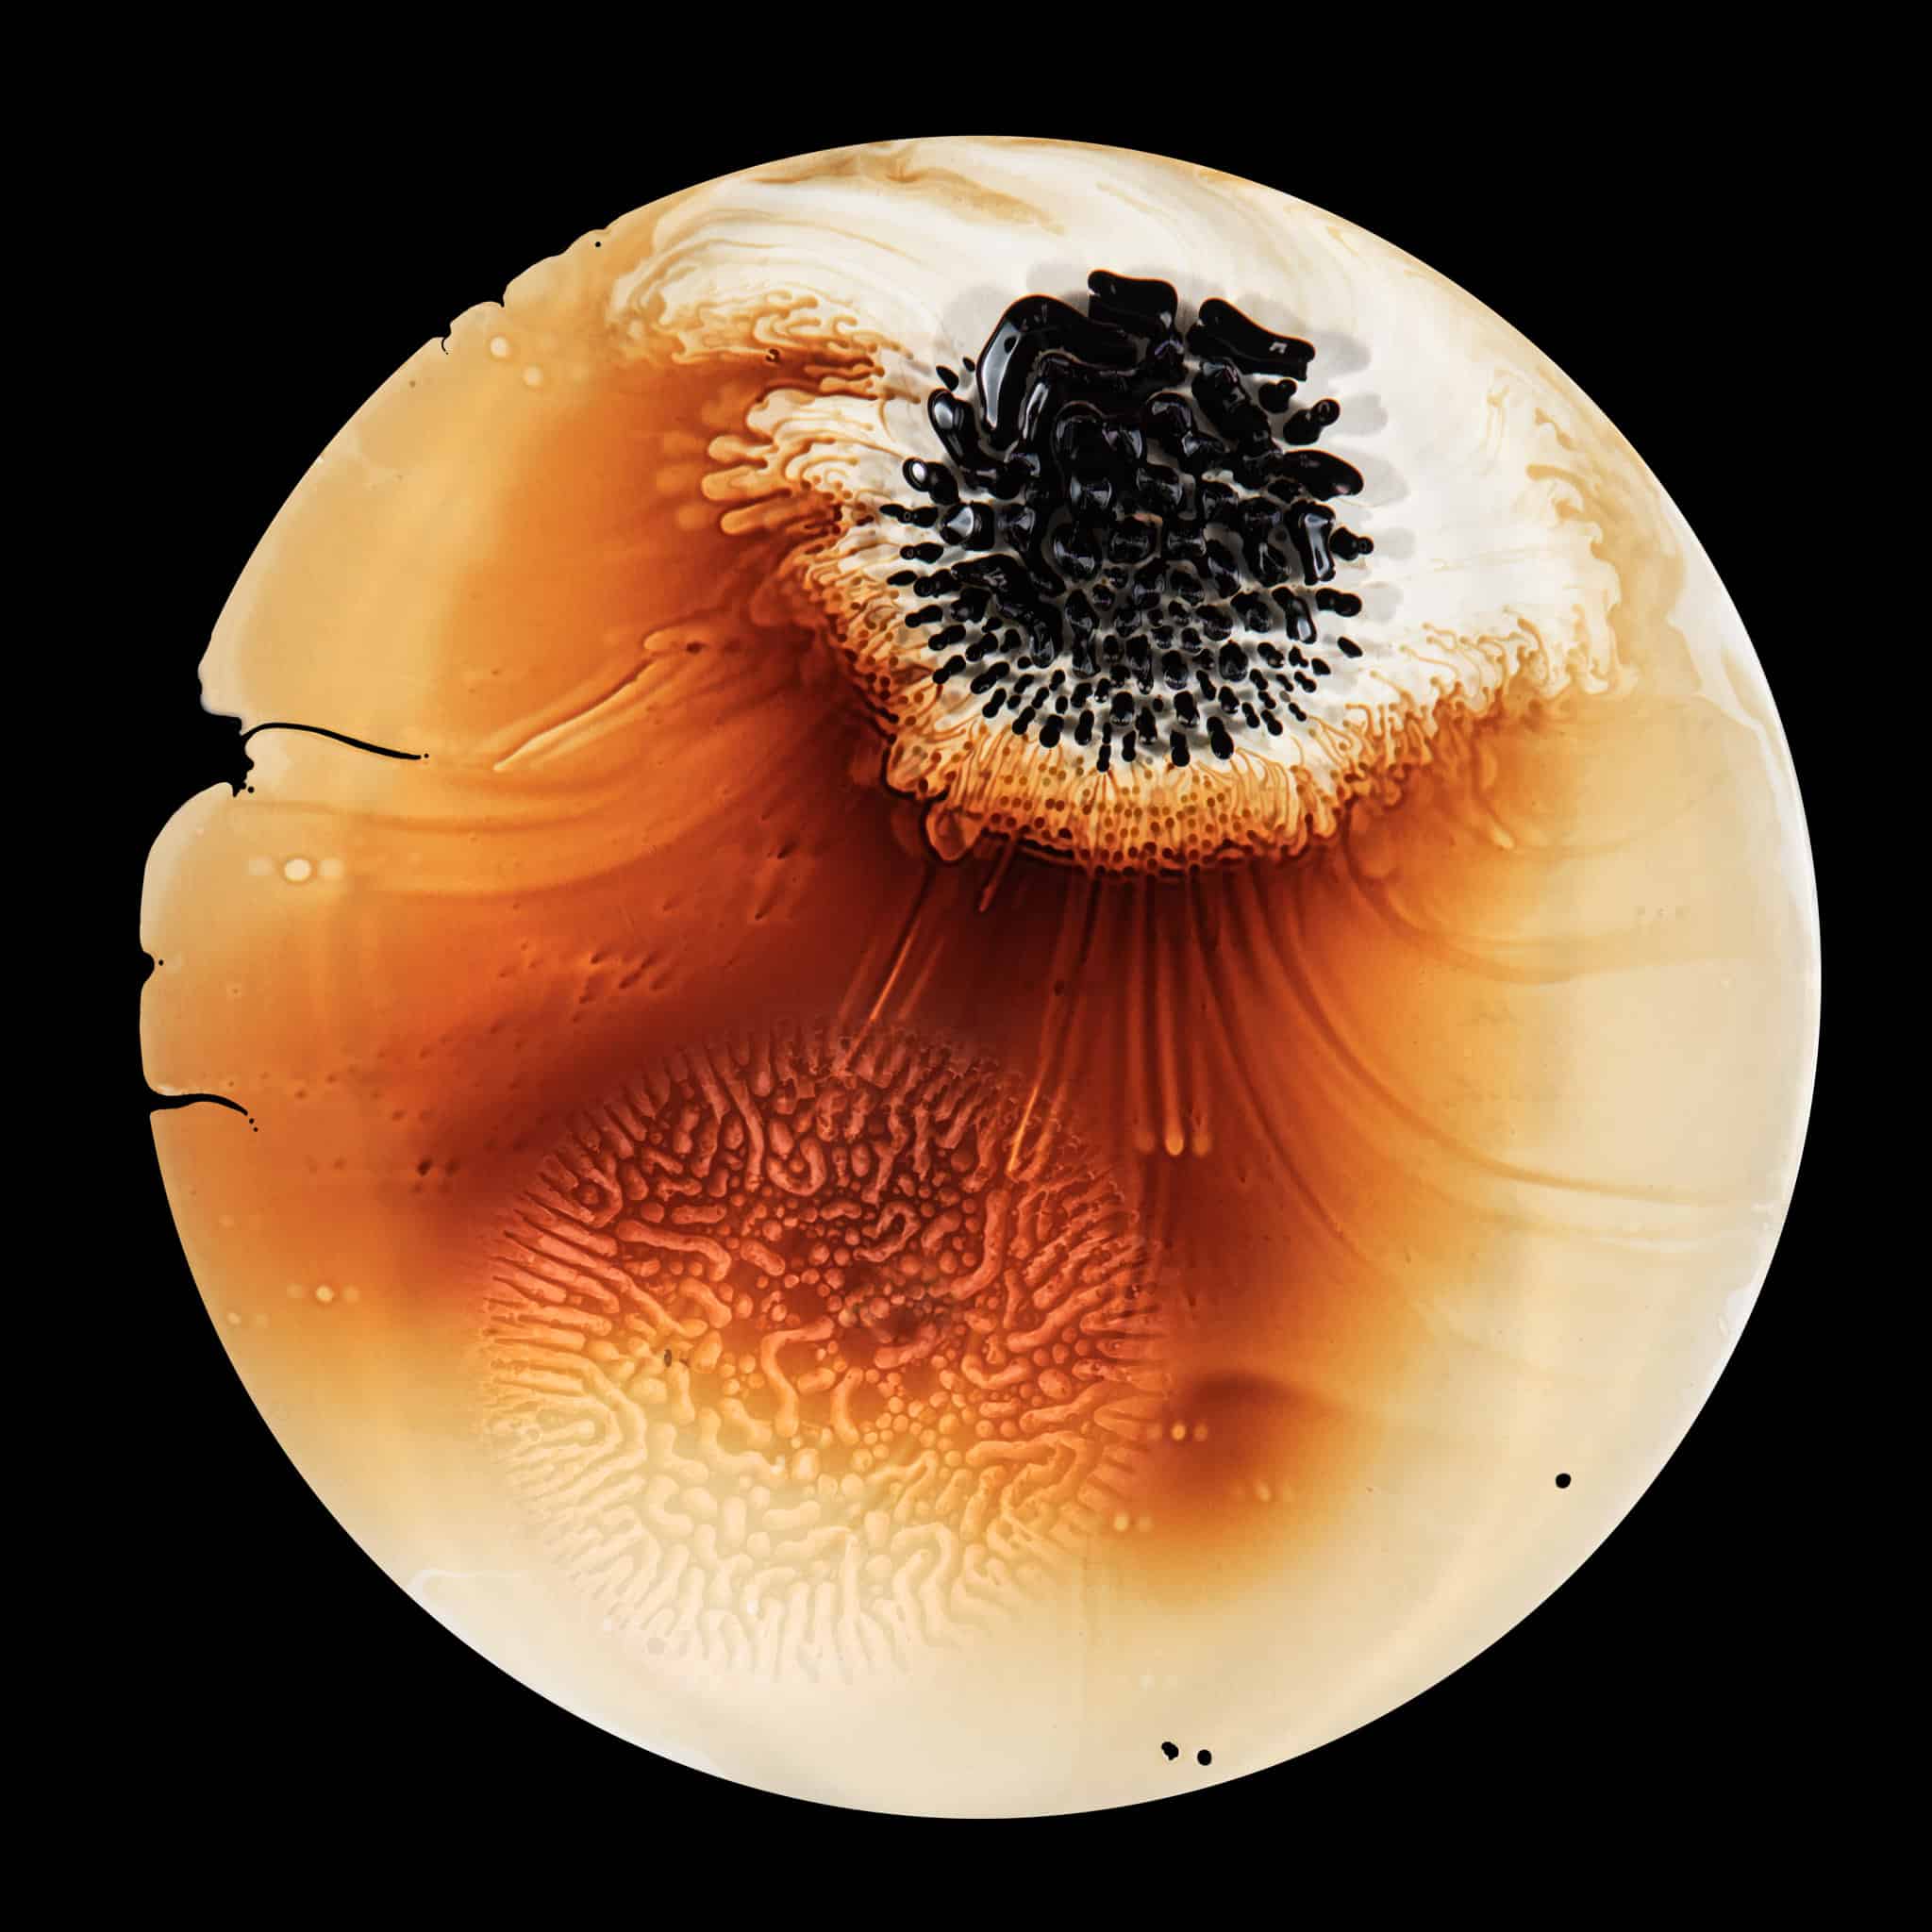 Ferro-magnetic fluid is pulled through glycerine with a neodymium magnet in a petrie dish.  - Ferrofluid abstract photographs